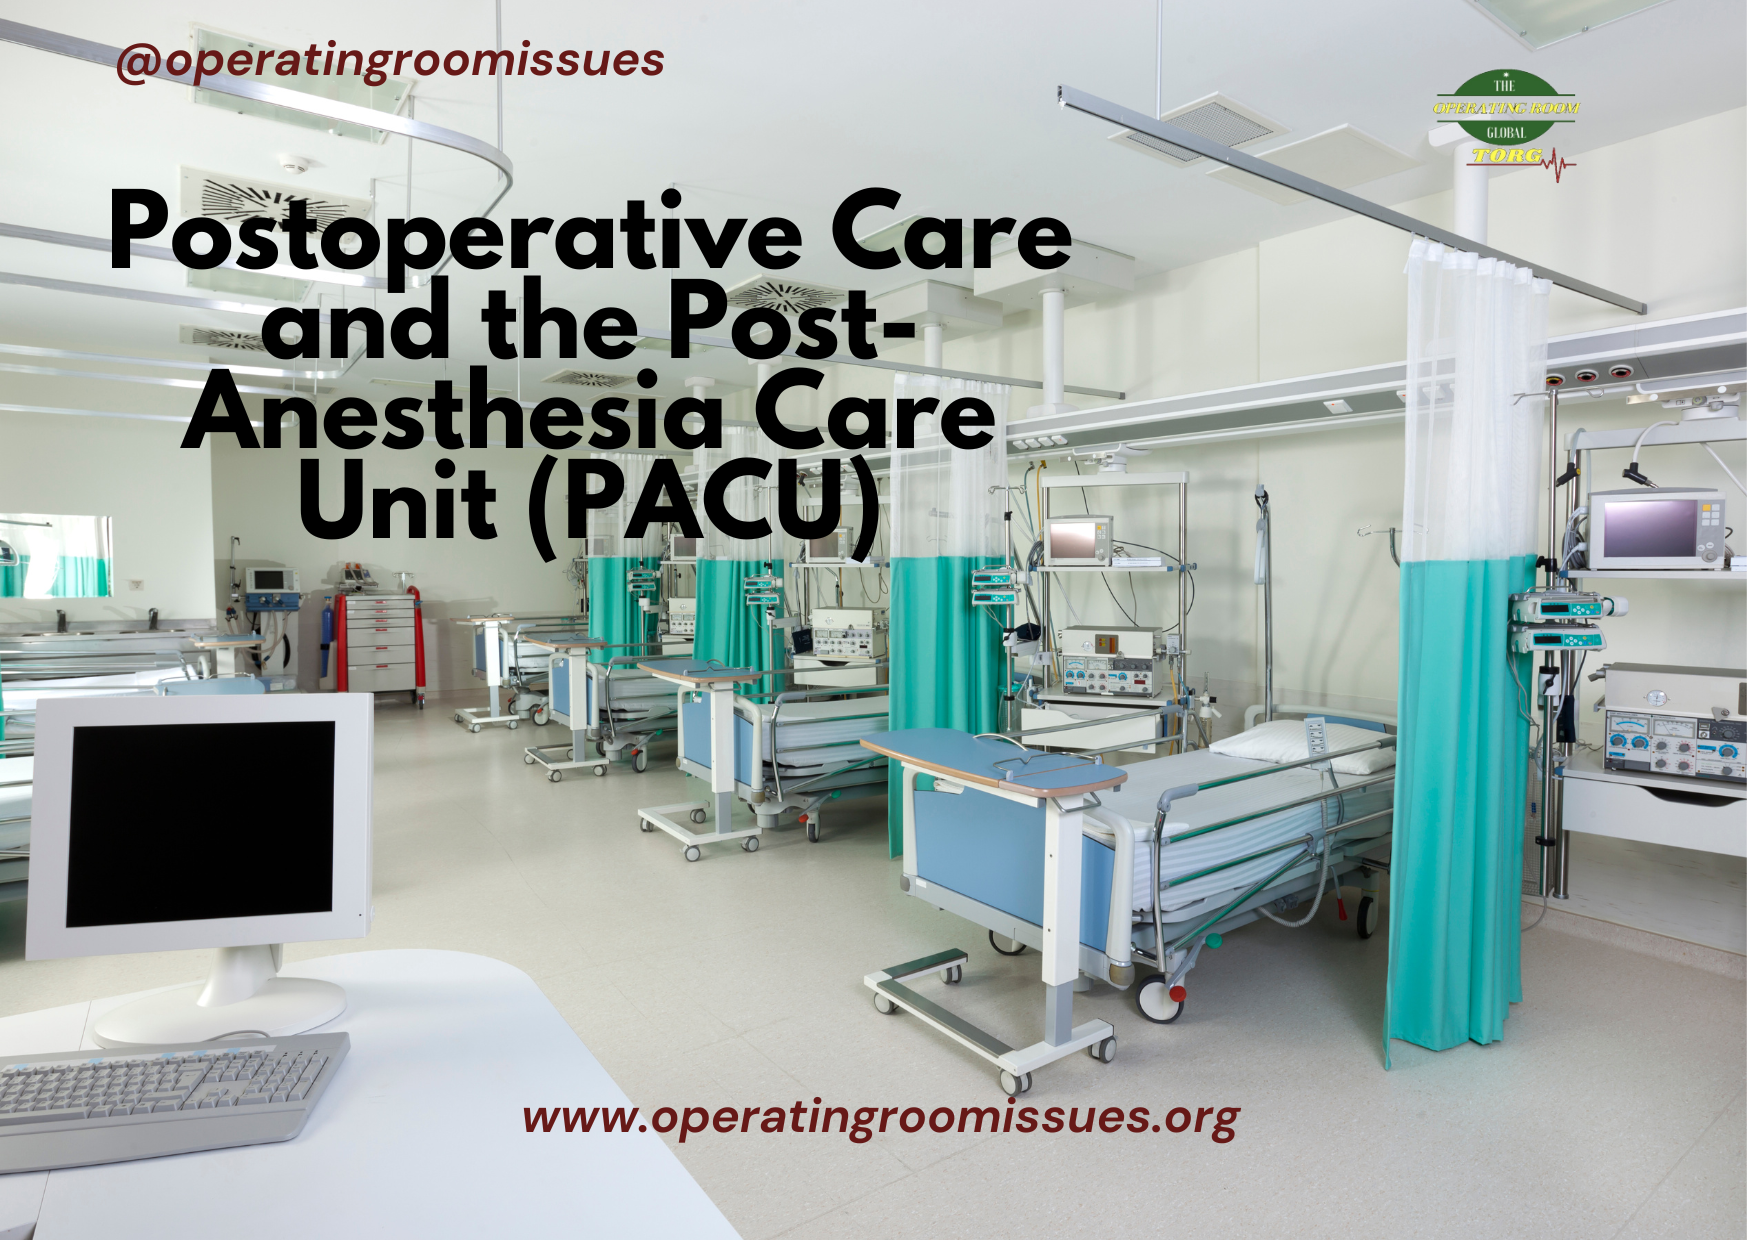 Postoperative Care and the Post-Anesthesia Care Unit (PACU)